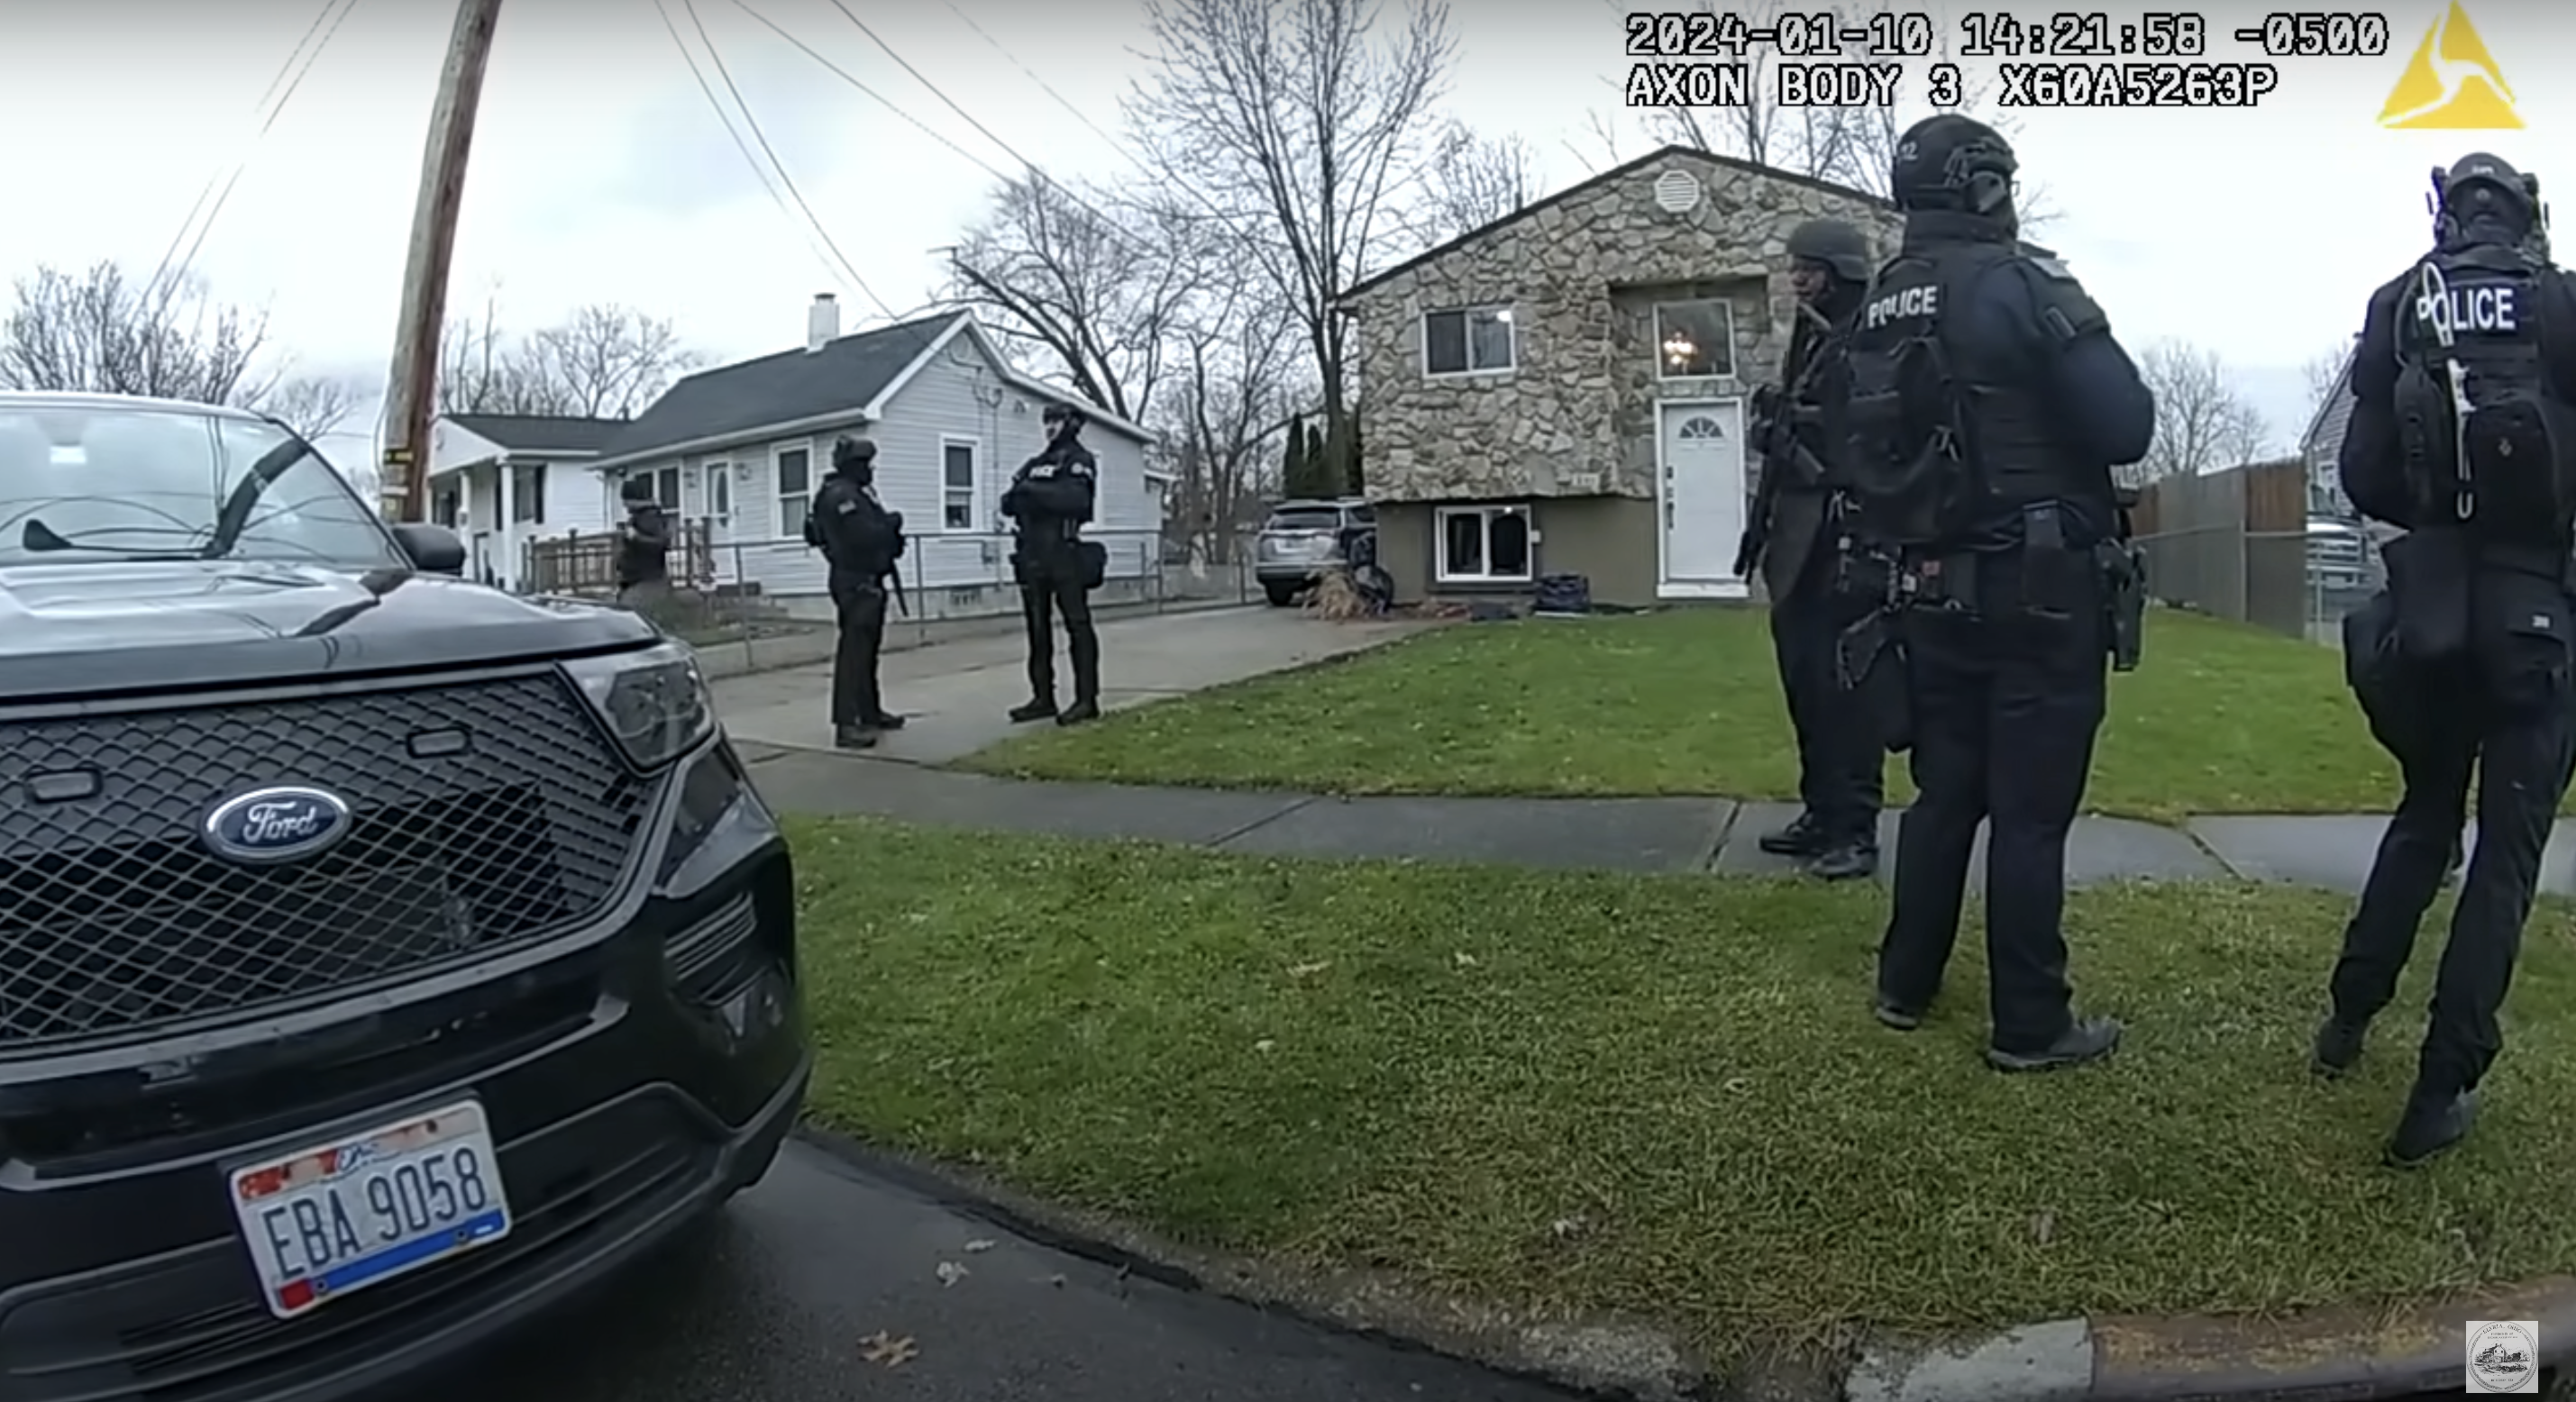 Police officers standing outside the residence of Courtney Price's aunt and uncle, as seen in a video dated January 17, 2024 | Source: youtube.com/CityofElyriaChannel